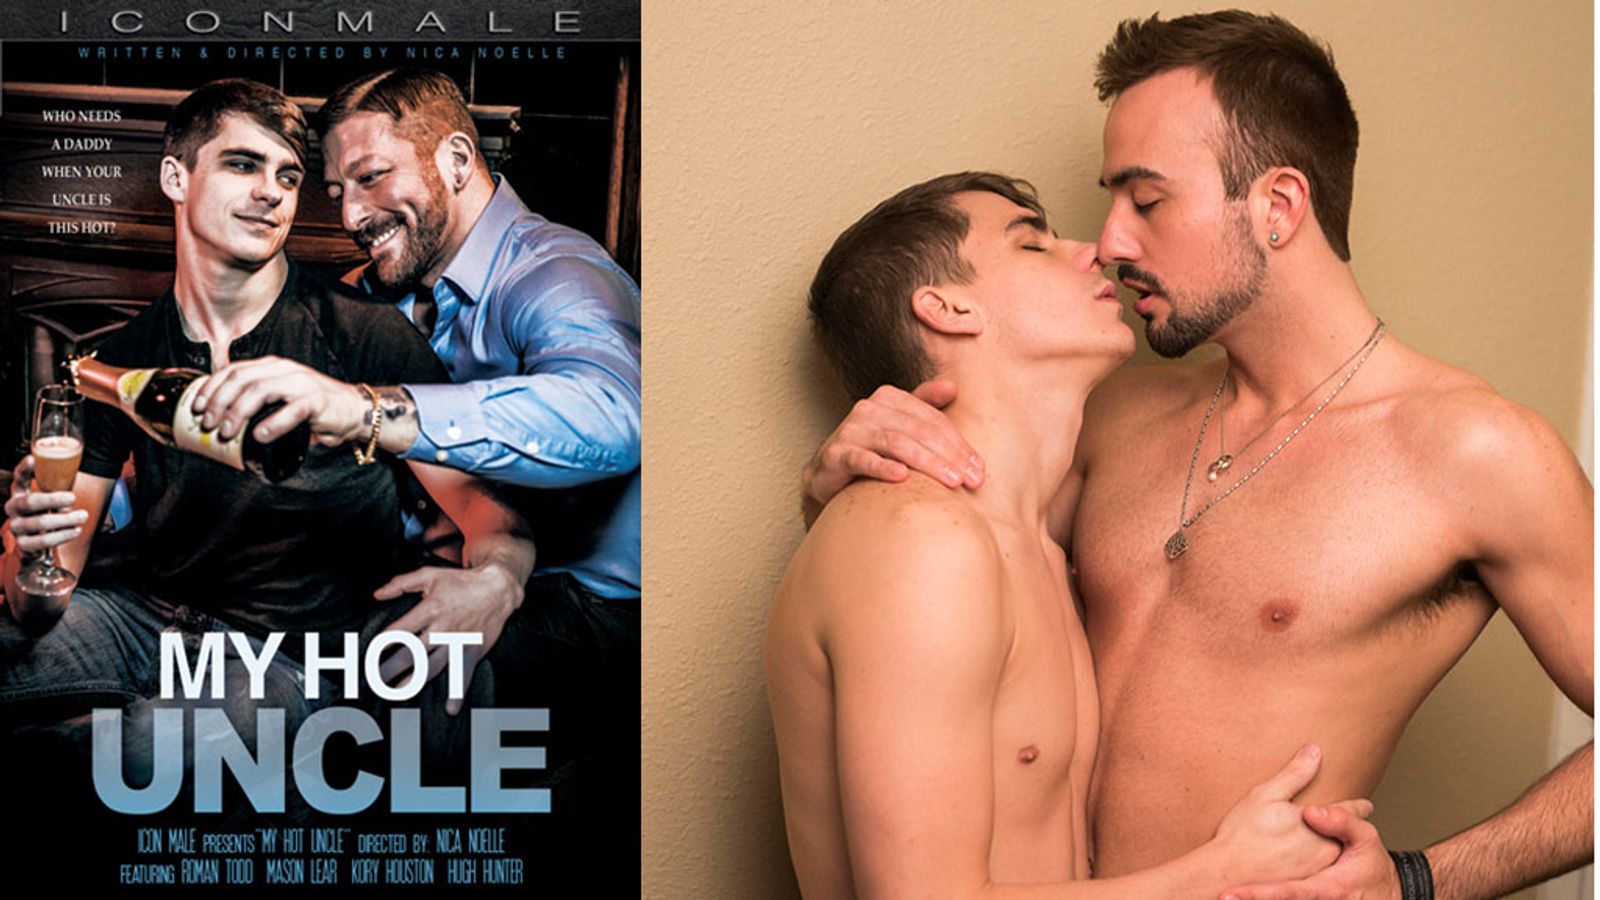 Nica Noelle Examines The Daddy Fetish In A New Way With 'My Hot Uncle'